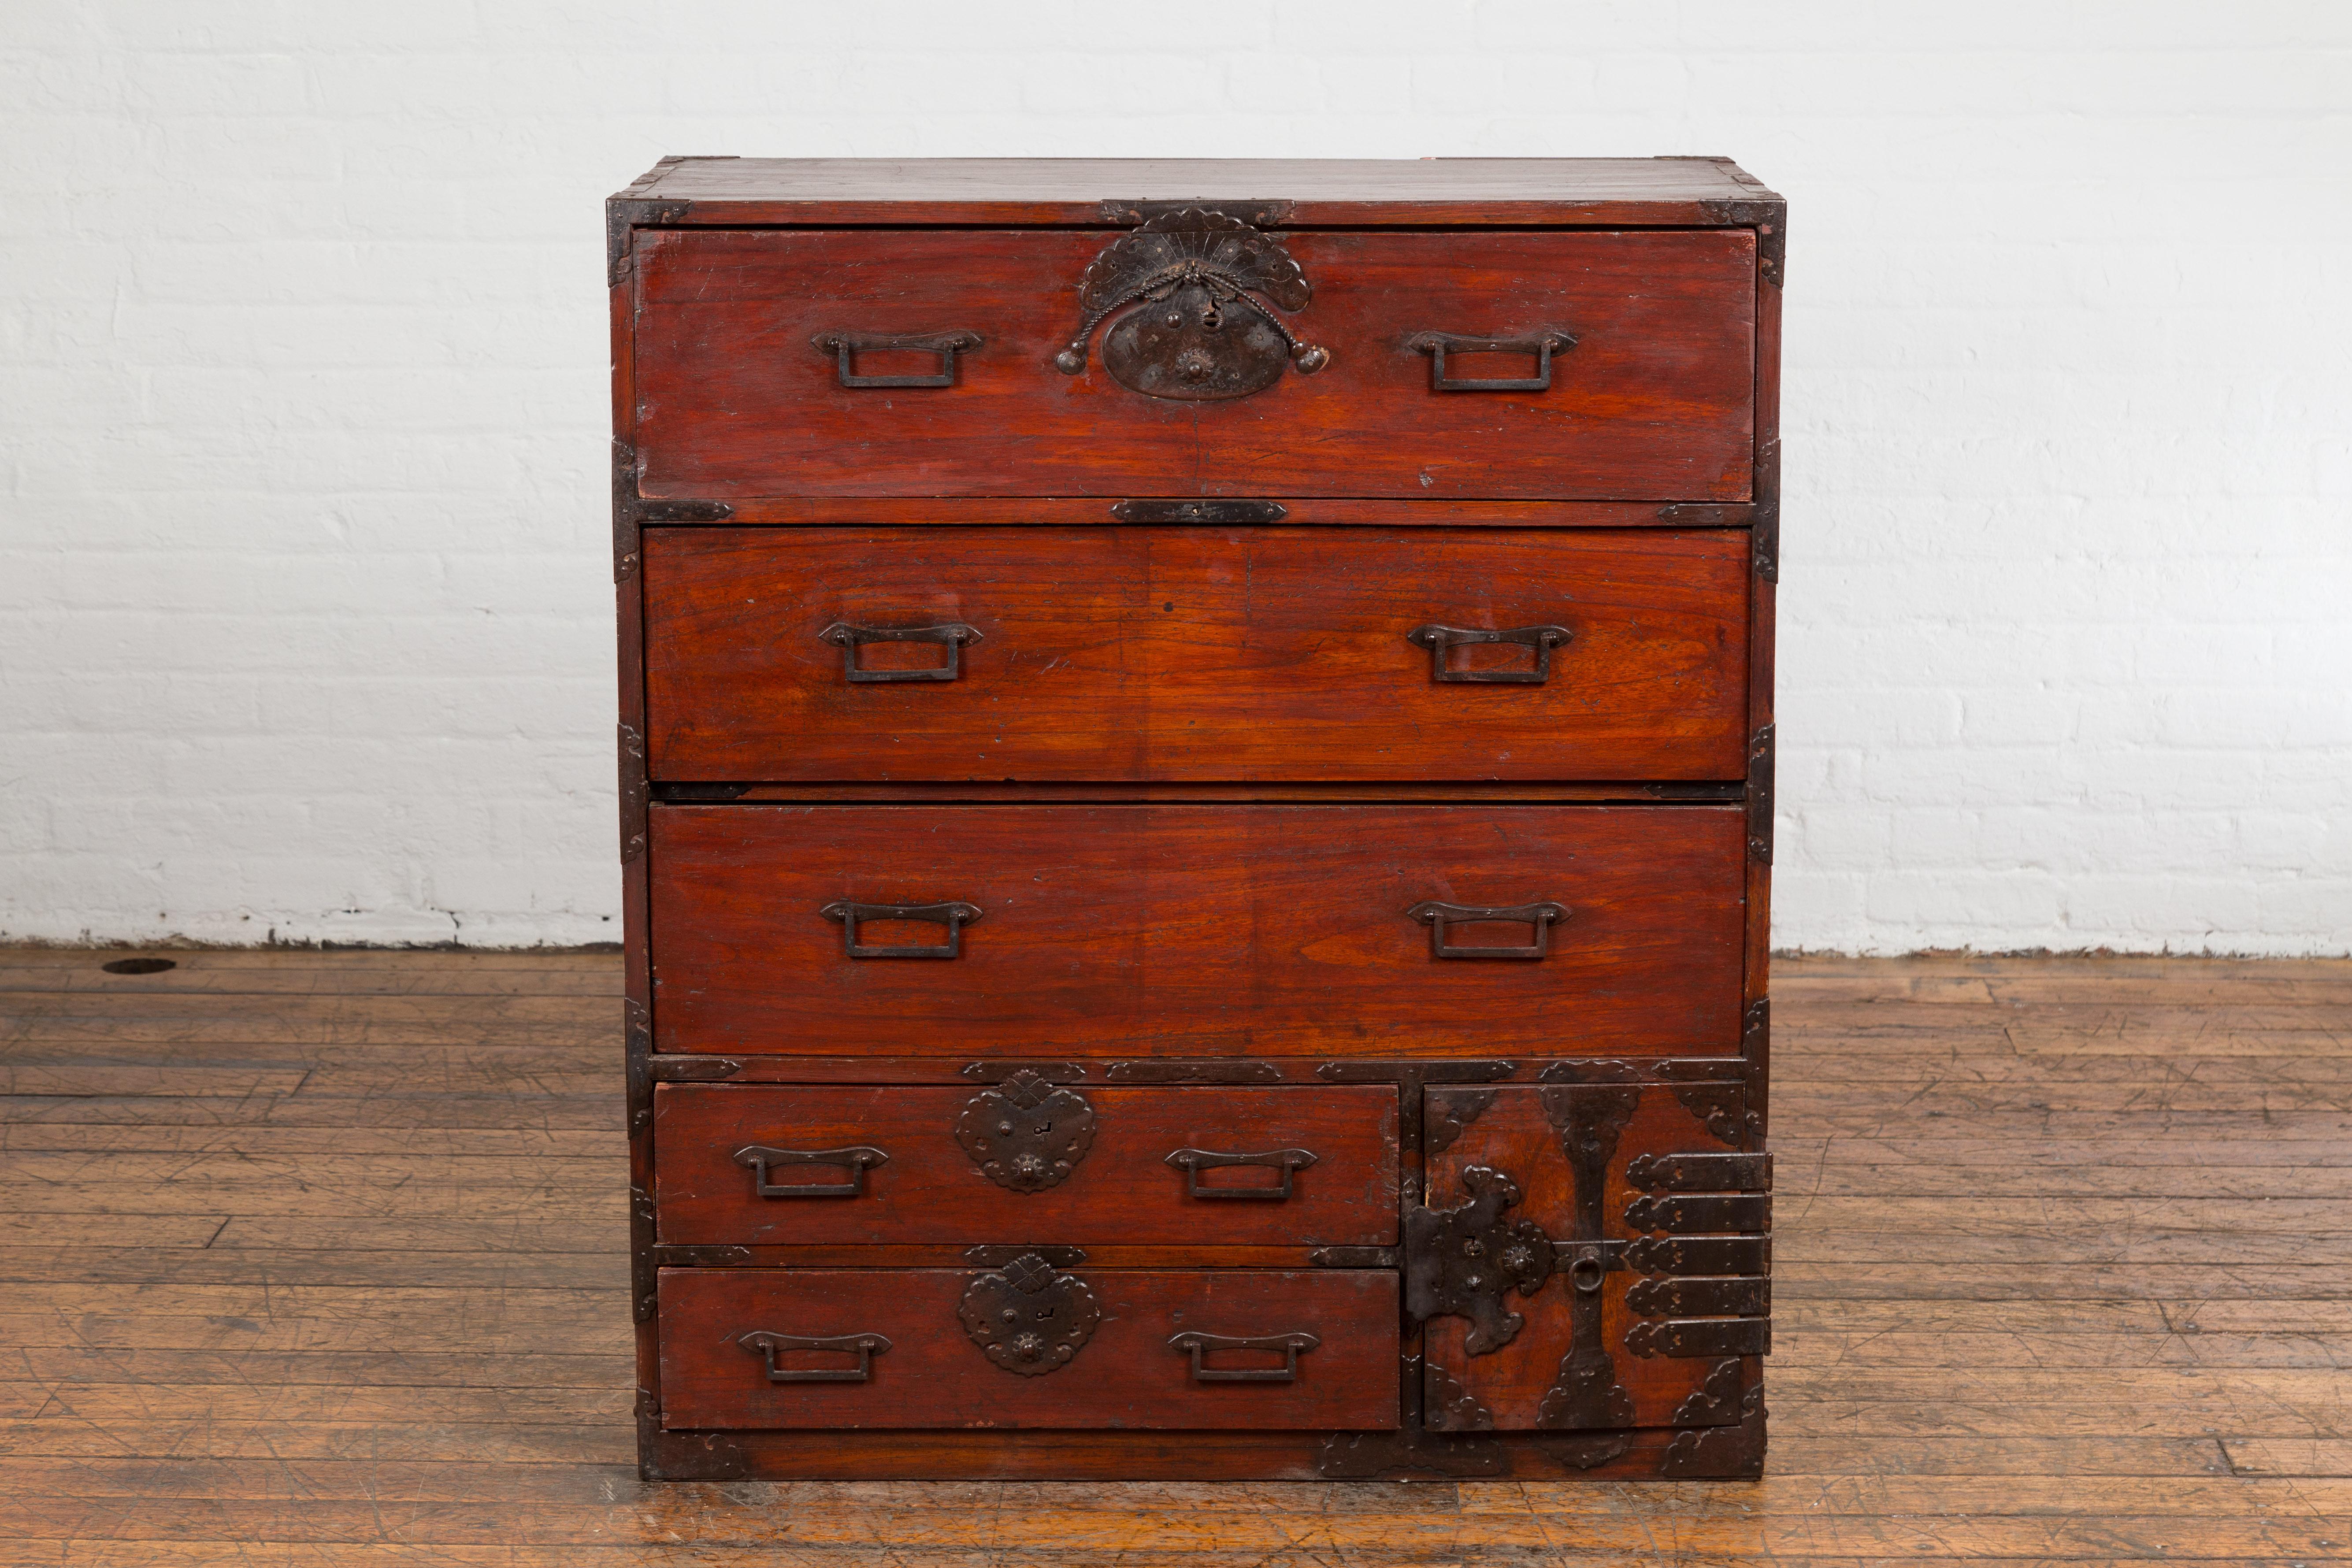 A Japanese Meiji period Isho Dansu clothing chest from the 19th century with reddish brown lacquer, iron hardware, five drawers and a side door revealing two additional hidden drawers. Exuding an aura of refined grace and practicality, this